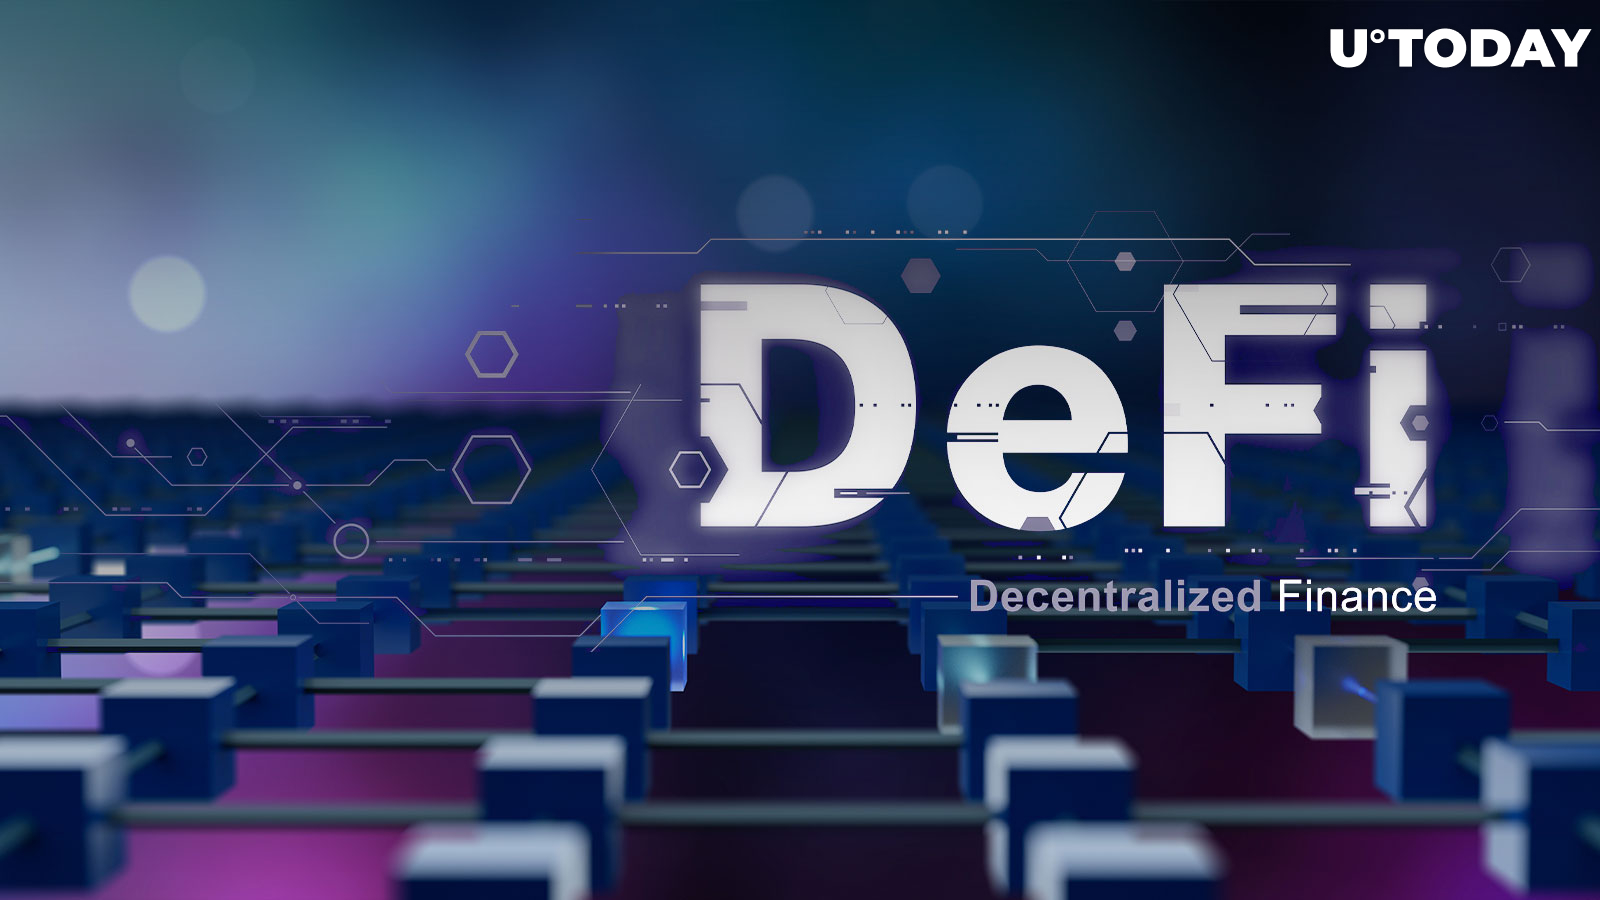 These DeFi Tokens Are Really Innovative: Analyst